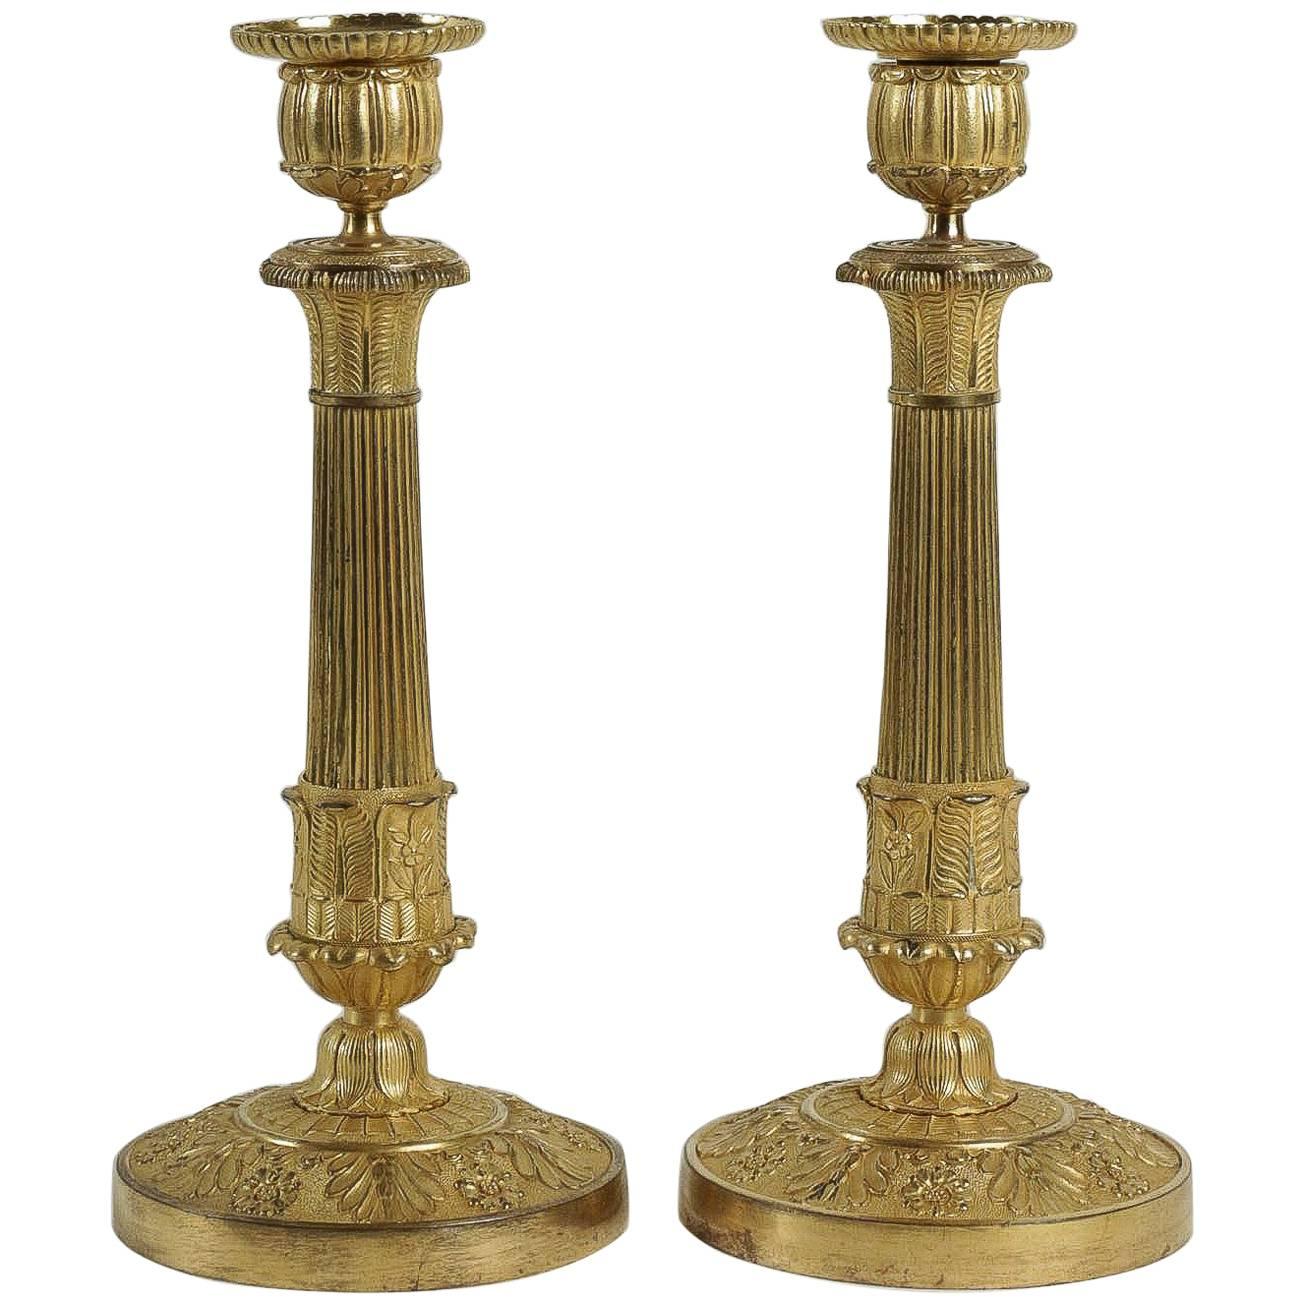 French Empire Period, Pair of Chiseled Ormolu Candlesticks, circa 1810